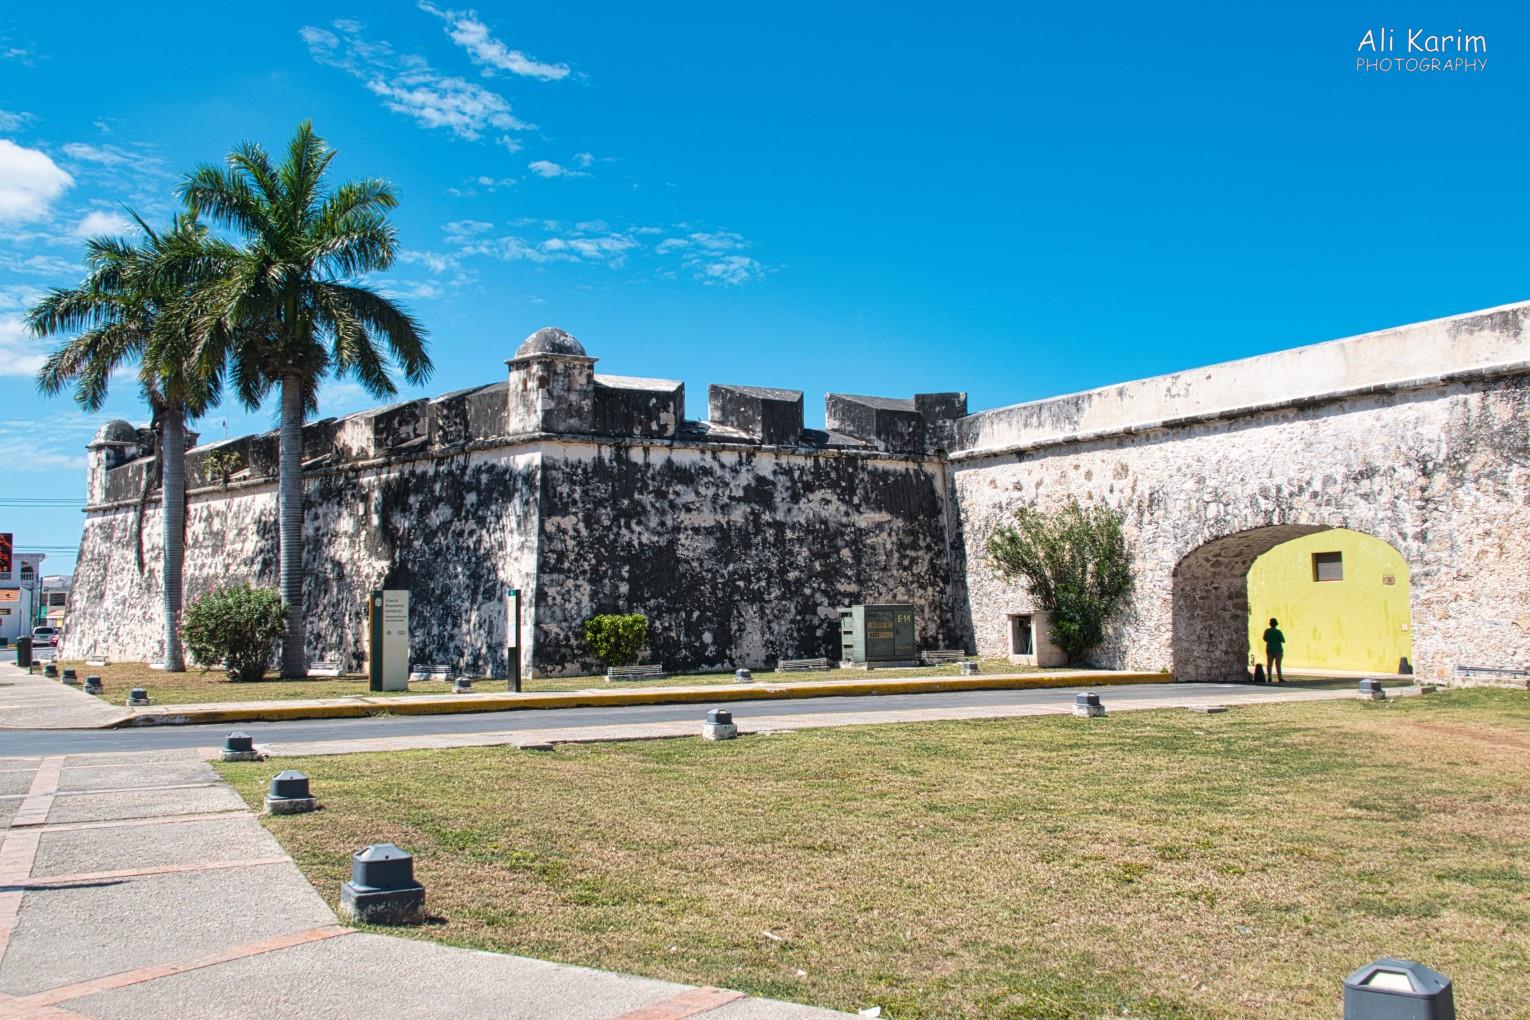 Mérida  & Campeche, Yucatan Peninsula, Mexico, Feb 2021, Fort, city wall and one entrance out of the old walled city